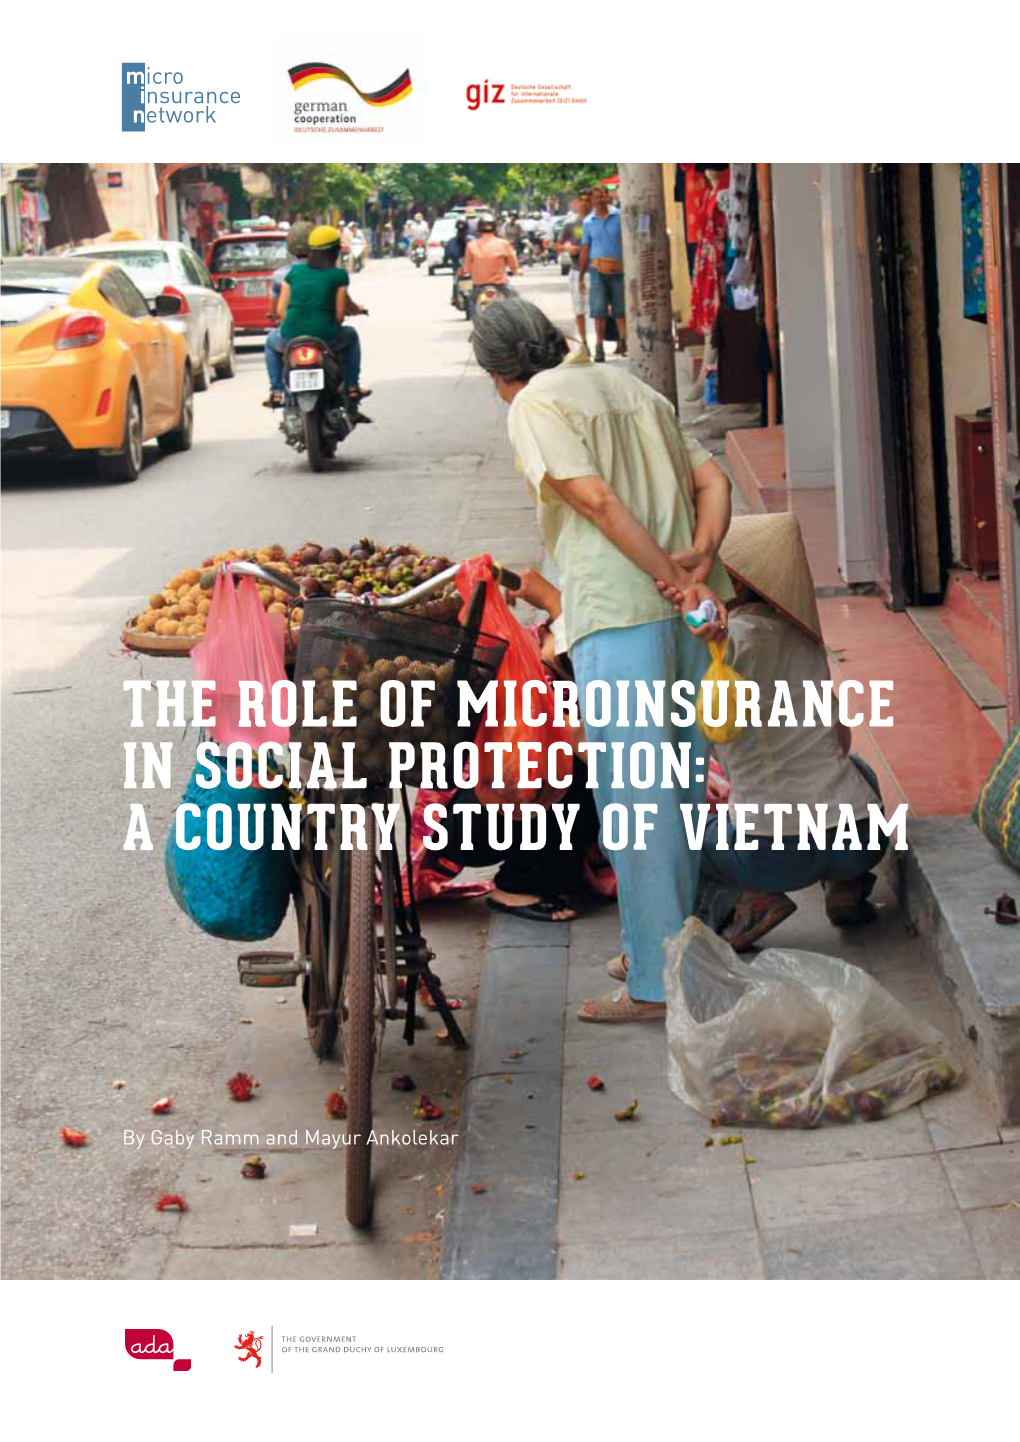 The Role of Microinsurance in Social Protection: a Country Study of Vietnam